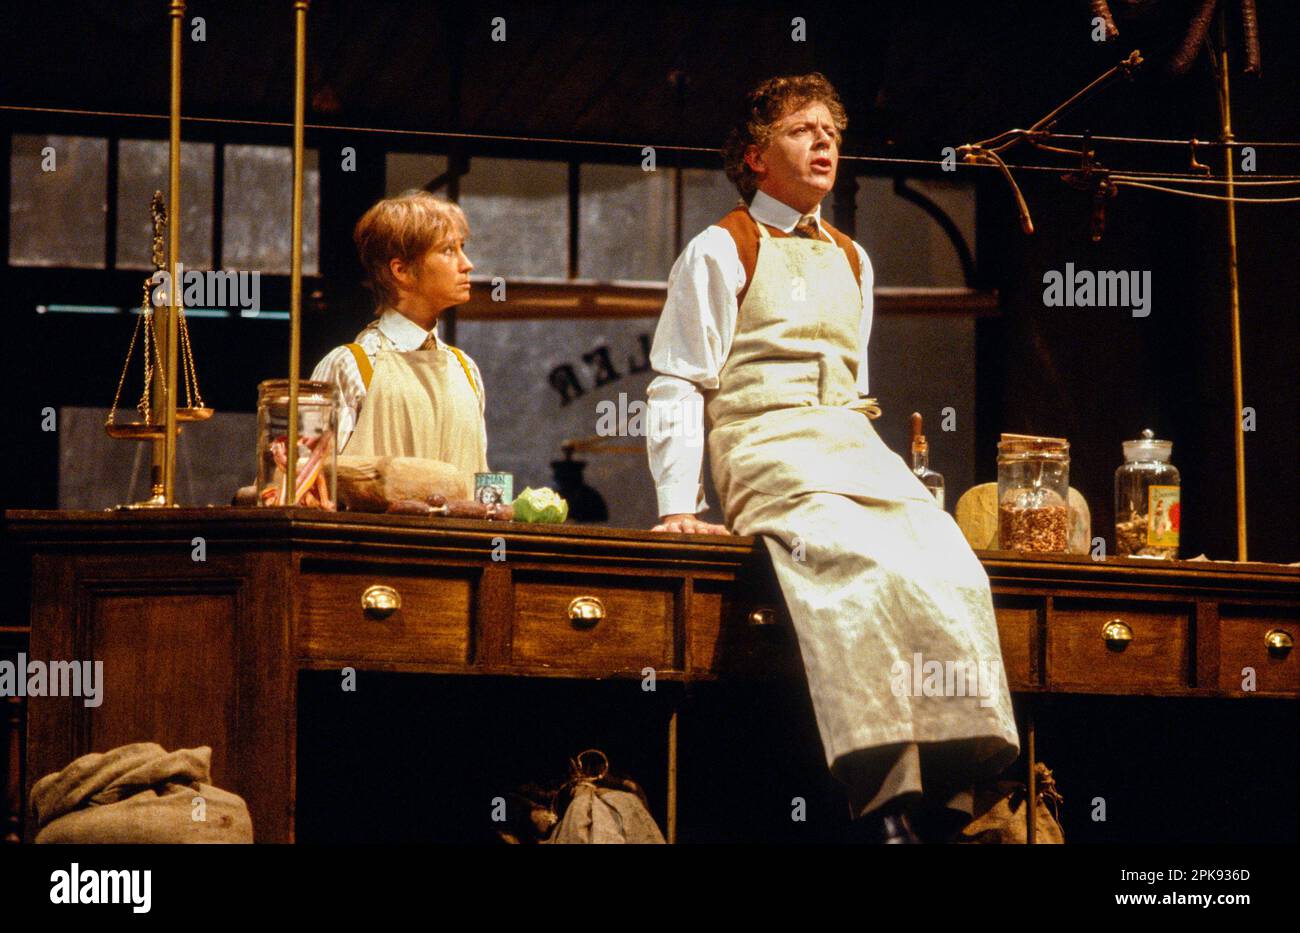 Felicity Kendal (Christopher), Ray Brooks (Weinberl) in ON THE RAZZLE by Tom Stoppard at the Lyttelton Theatre, National Theatre (NT), London SE1  22/09/1981  adapted from 'Einen Jux will er sich machen' by Johann Nestroy  design: Carl Toms  lighting: Robert Bryan  director: Peter Wood Stock Photo